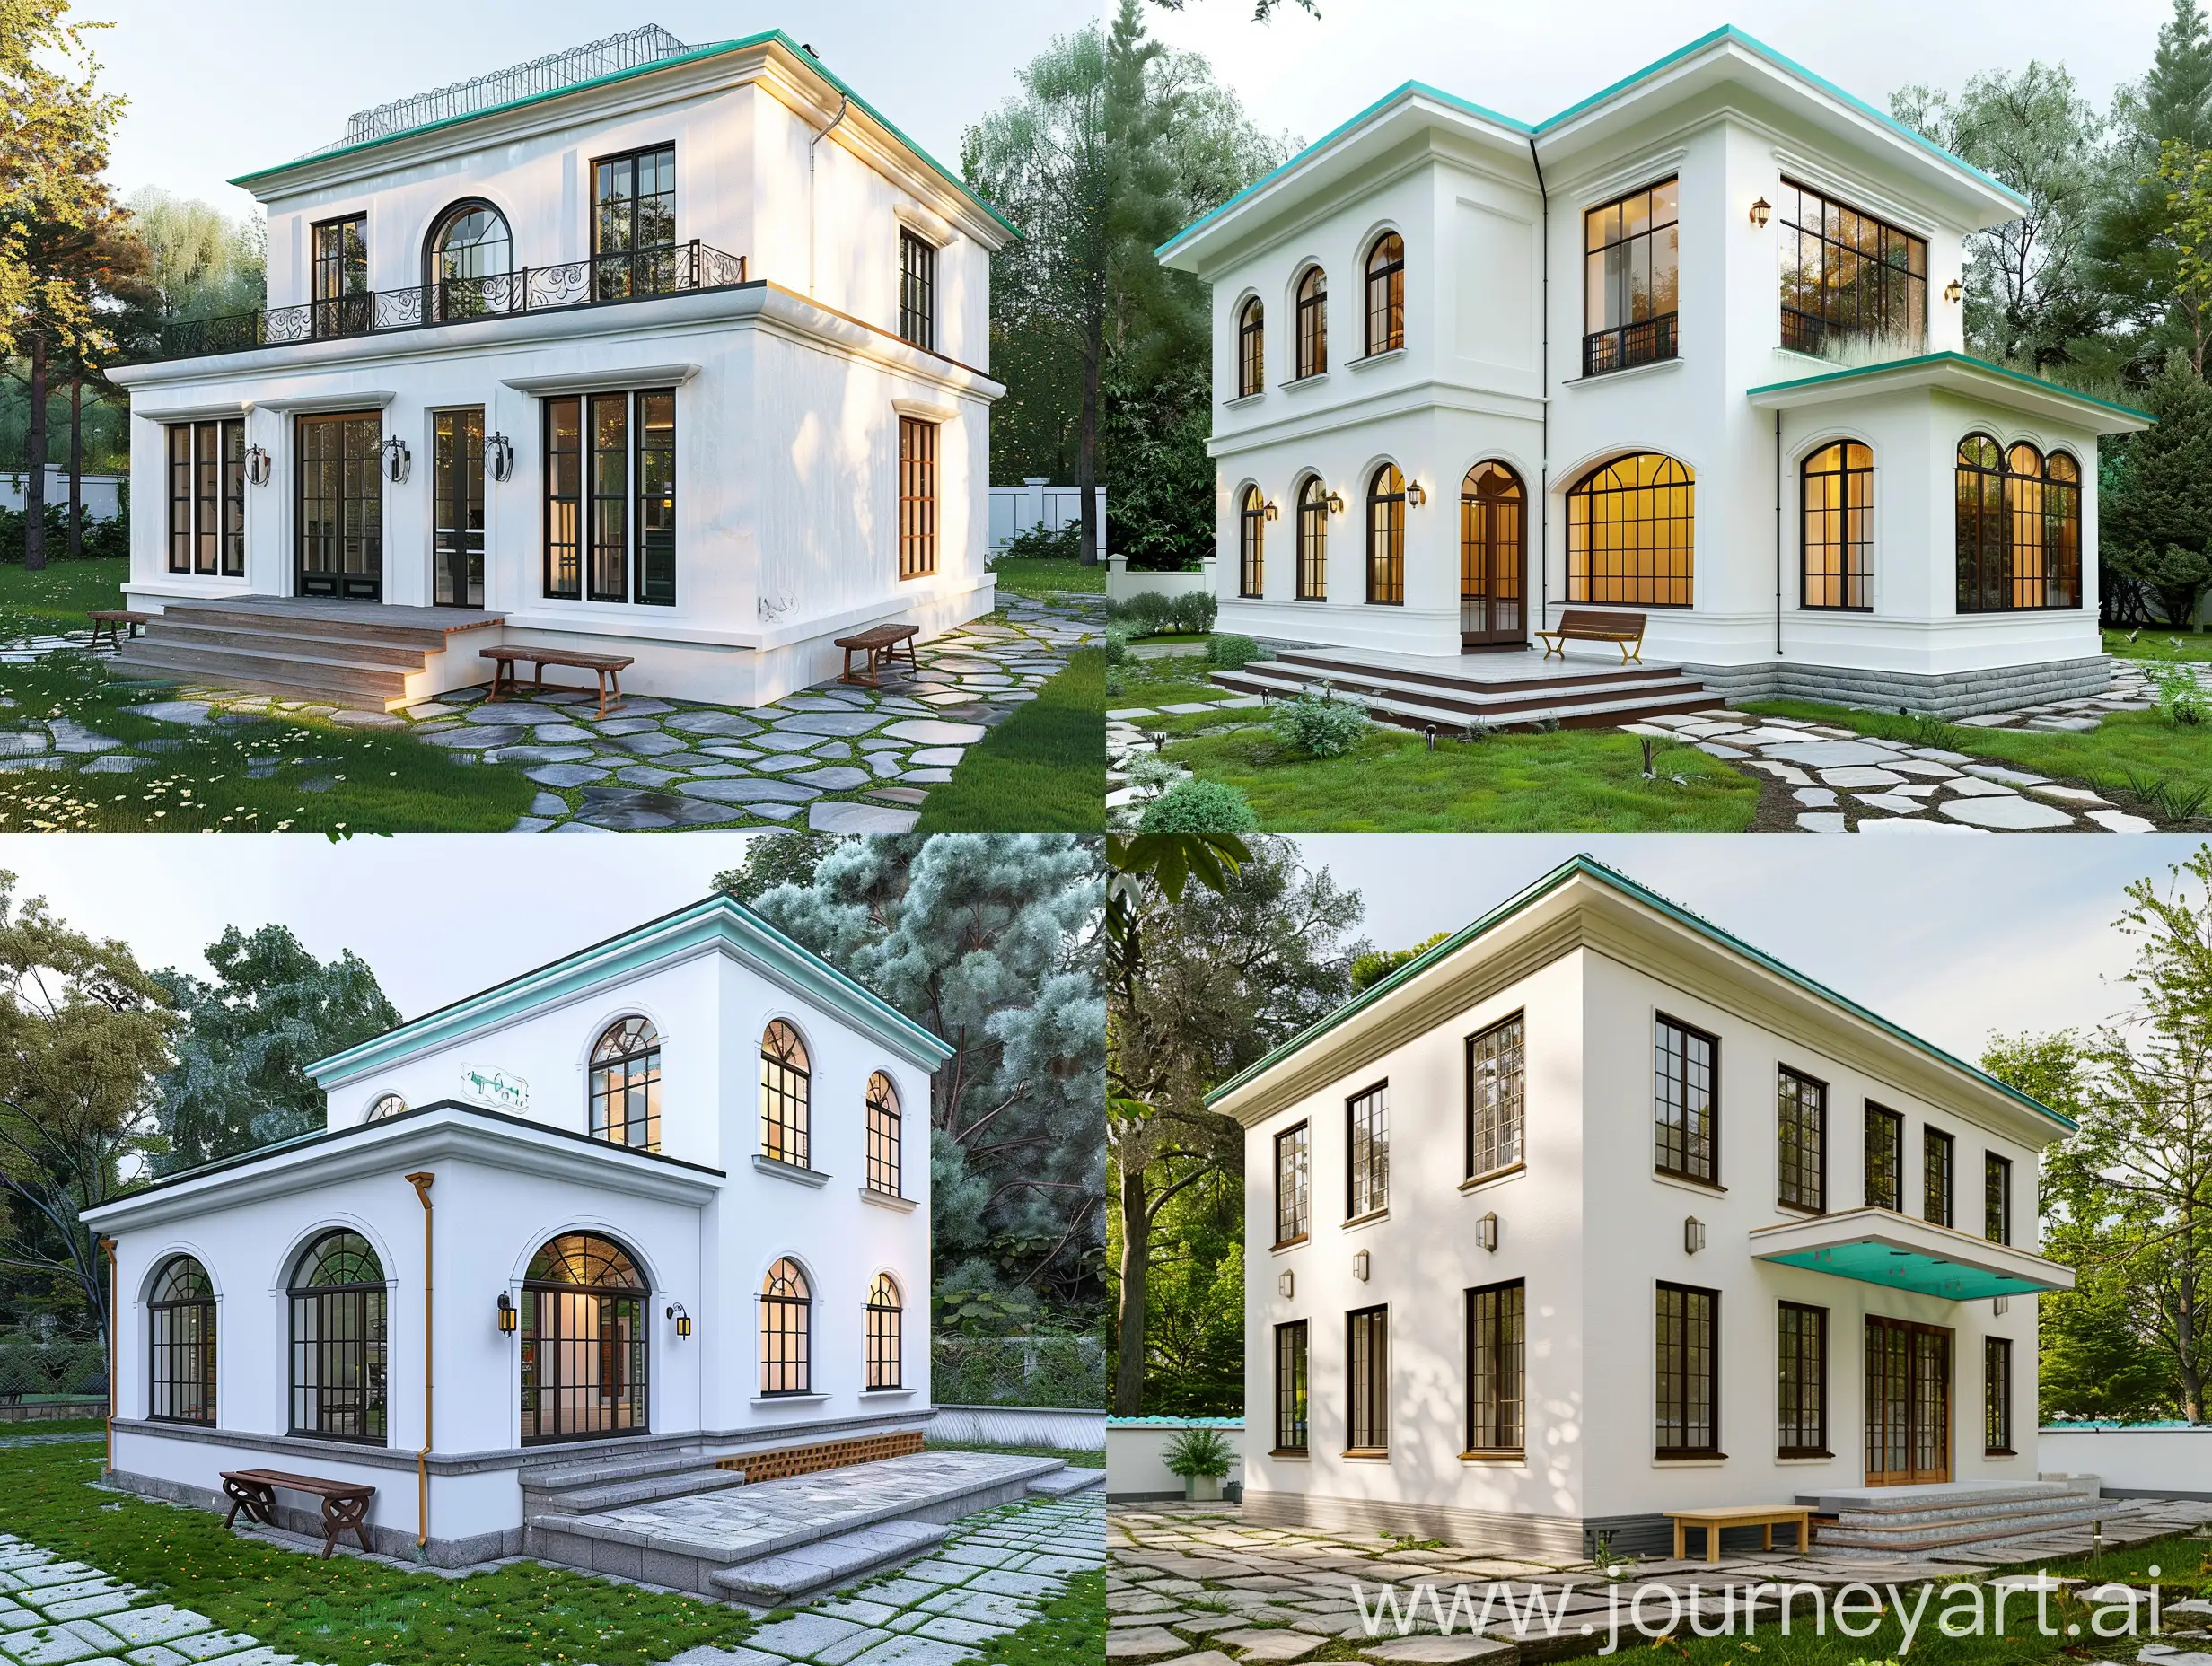 TwoStorey-White-House-with-Glazed-Veranda-and-Turquoise-Accents